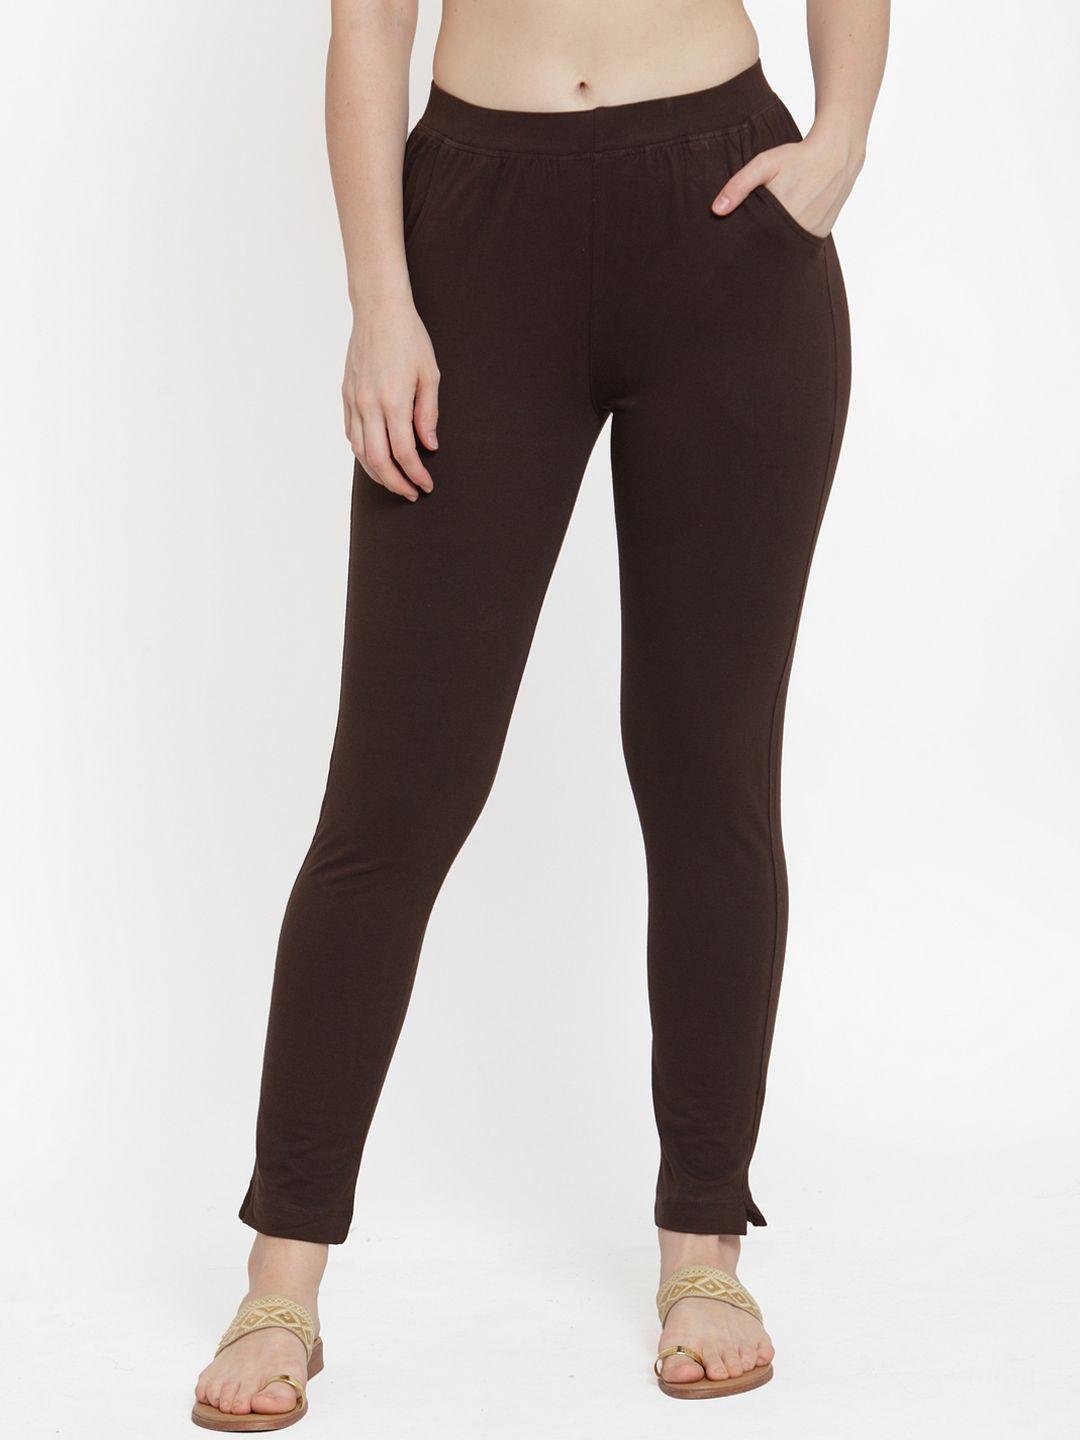 tag 7 women brown solid ankle-length legging